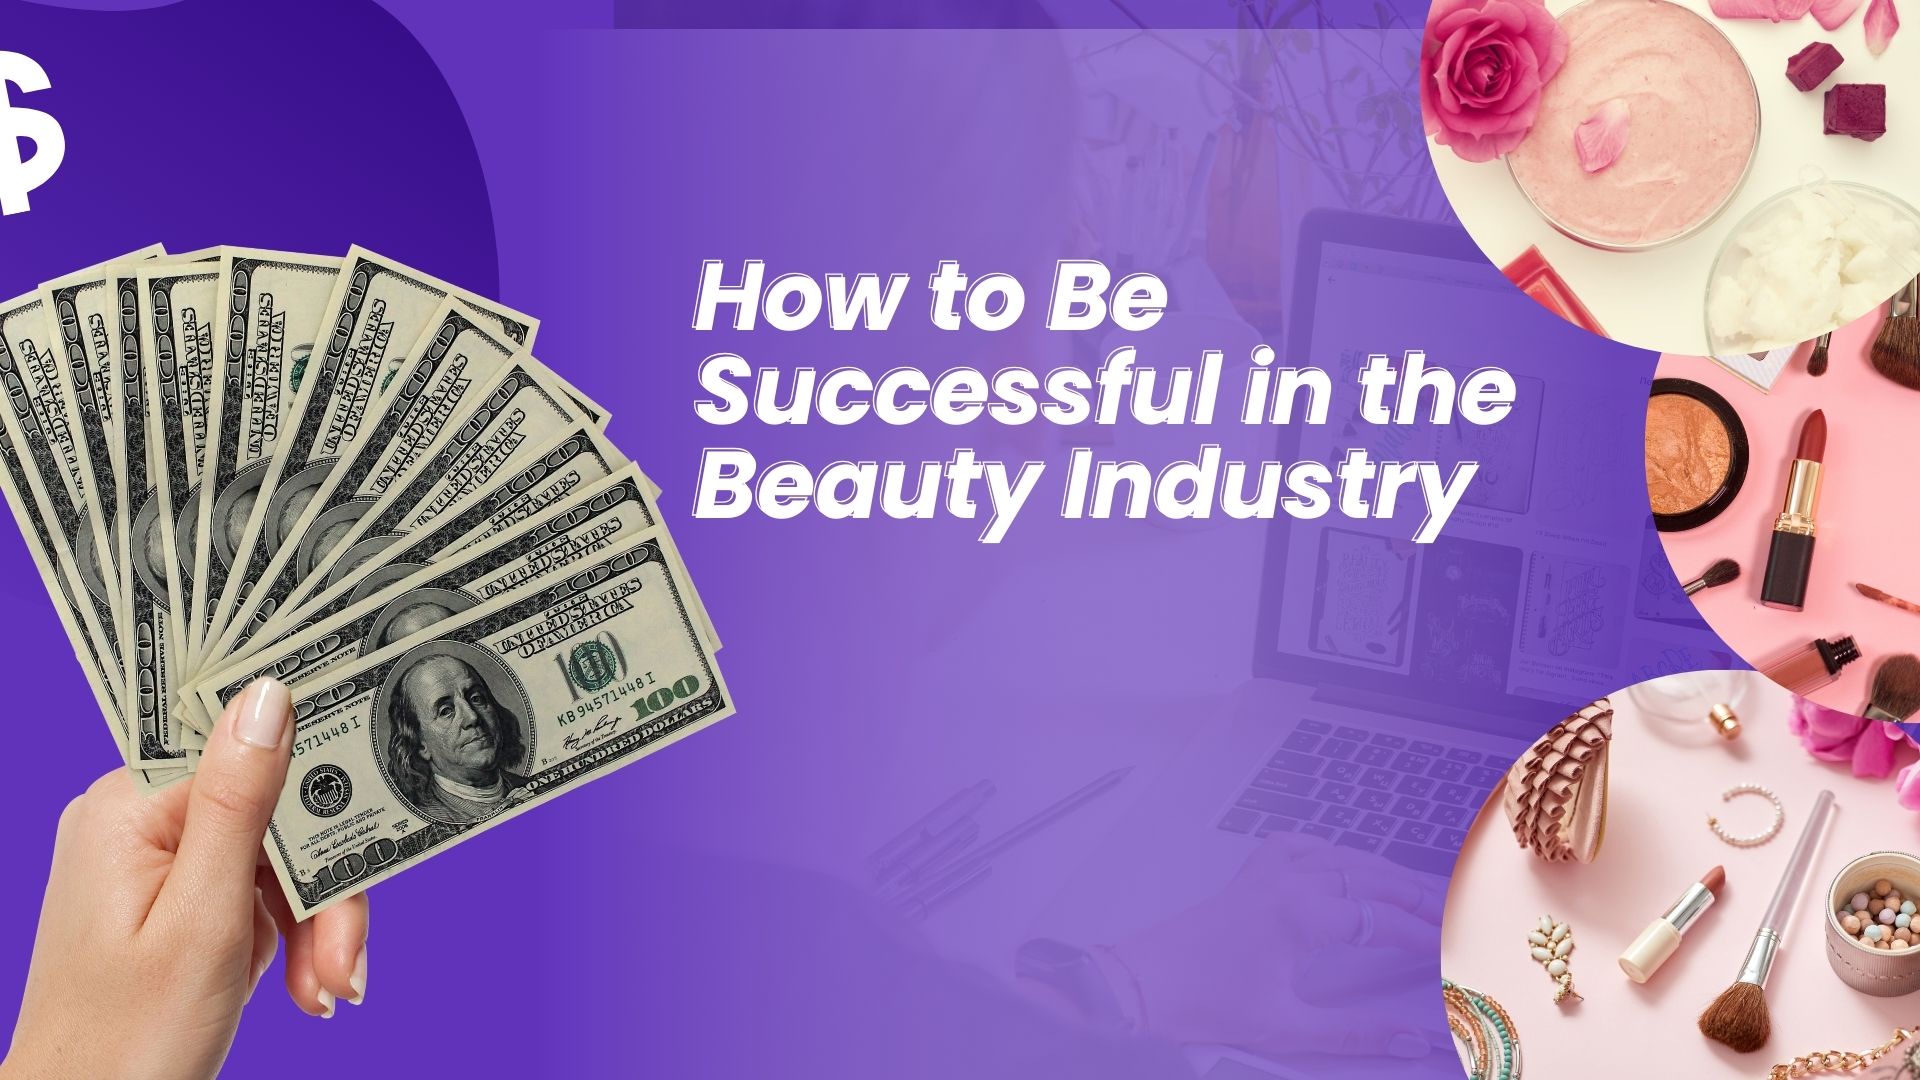 How to Be Successful in the Beauty Industry